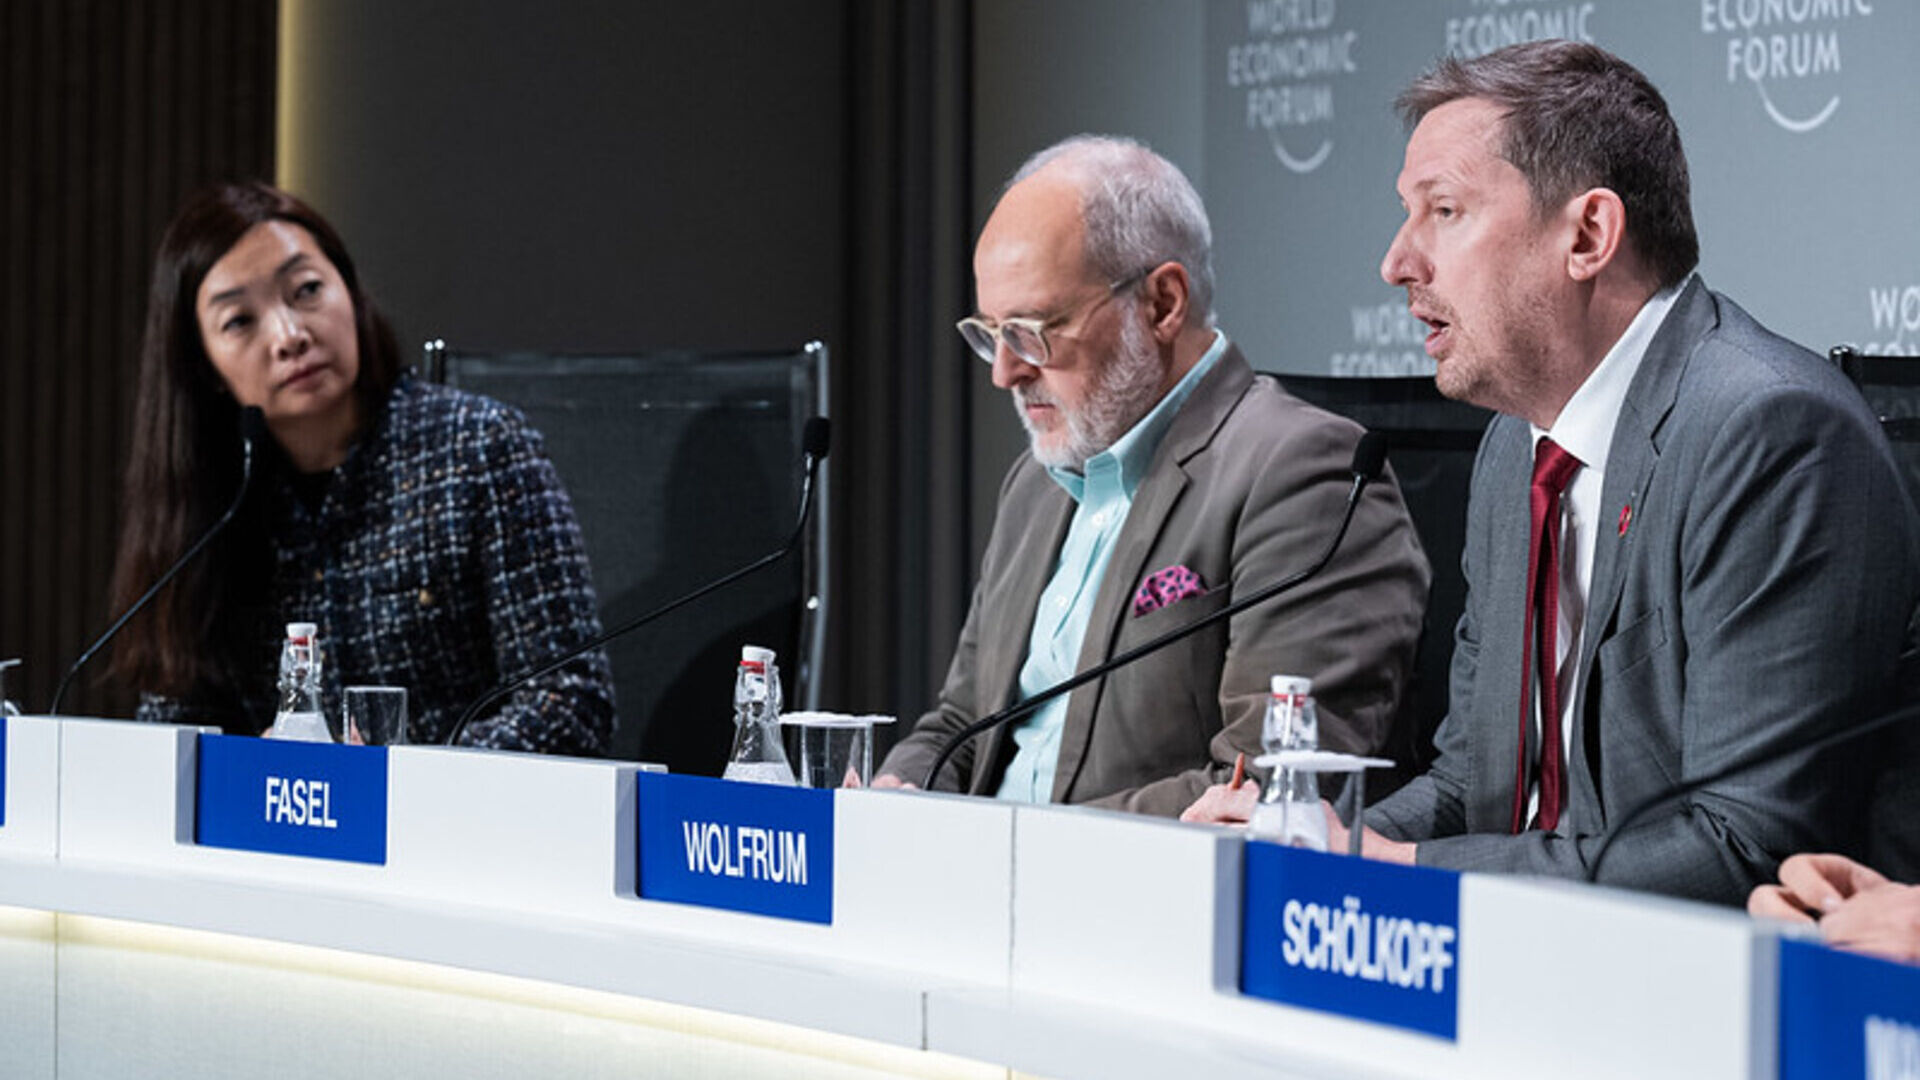 International Computation and AI Network: the ICAIN presentation press conference during the 2024 edition of the World Economic Forum in Davos (Canton of Grisons)